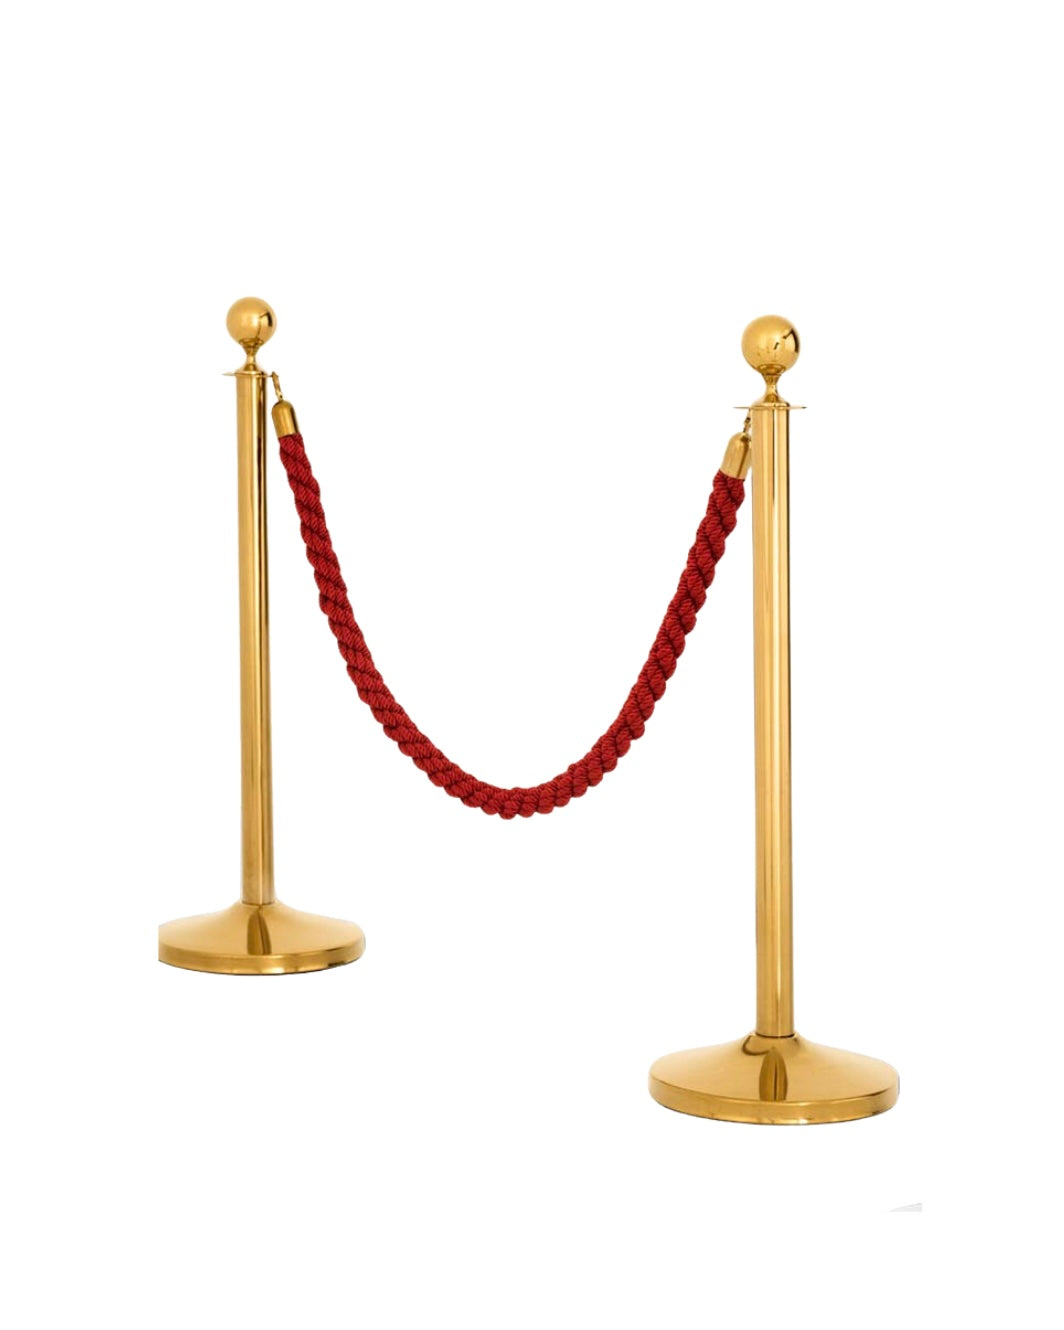 Cord VIP red gold finish handle